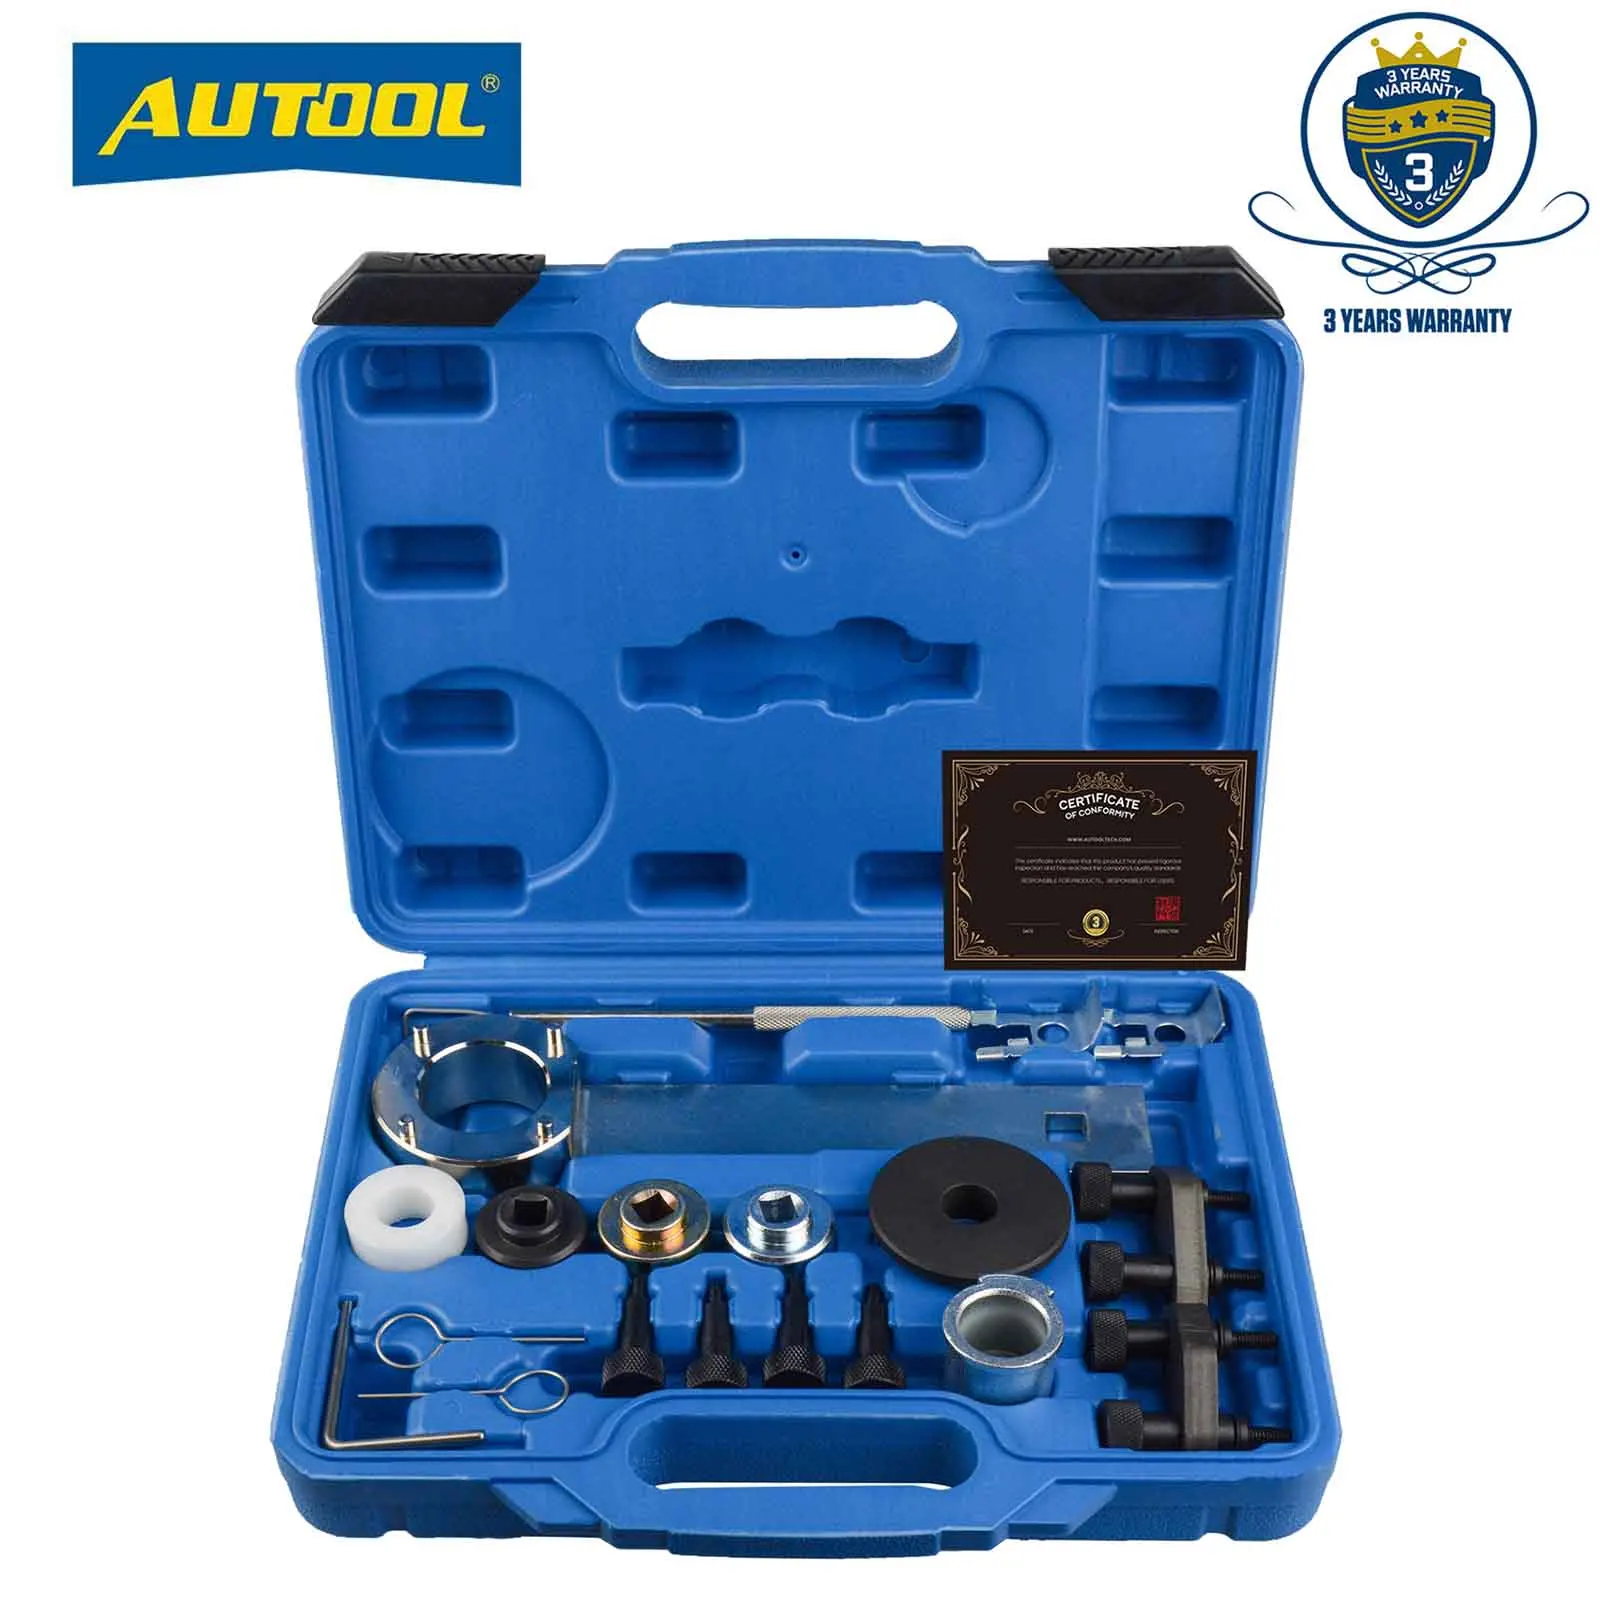 

AUTOOL Car Engine Camshaft Locking Alignment Timing Tool Kit for VW Audi VAG 1.8 2.0 TSI TFSI EA888 SF0233 With T10355 Wrench